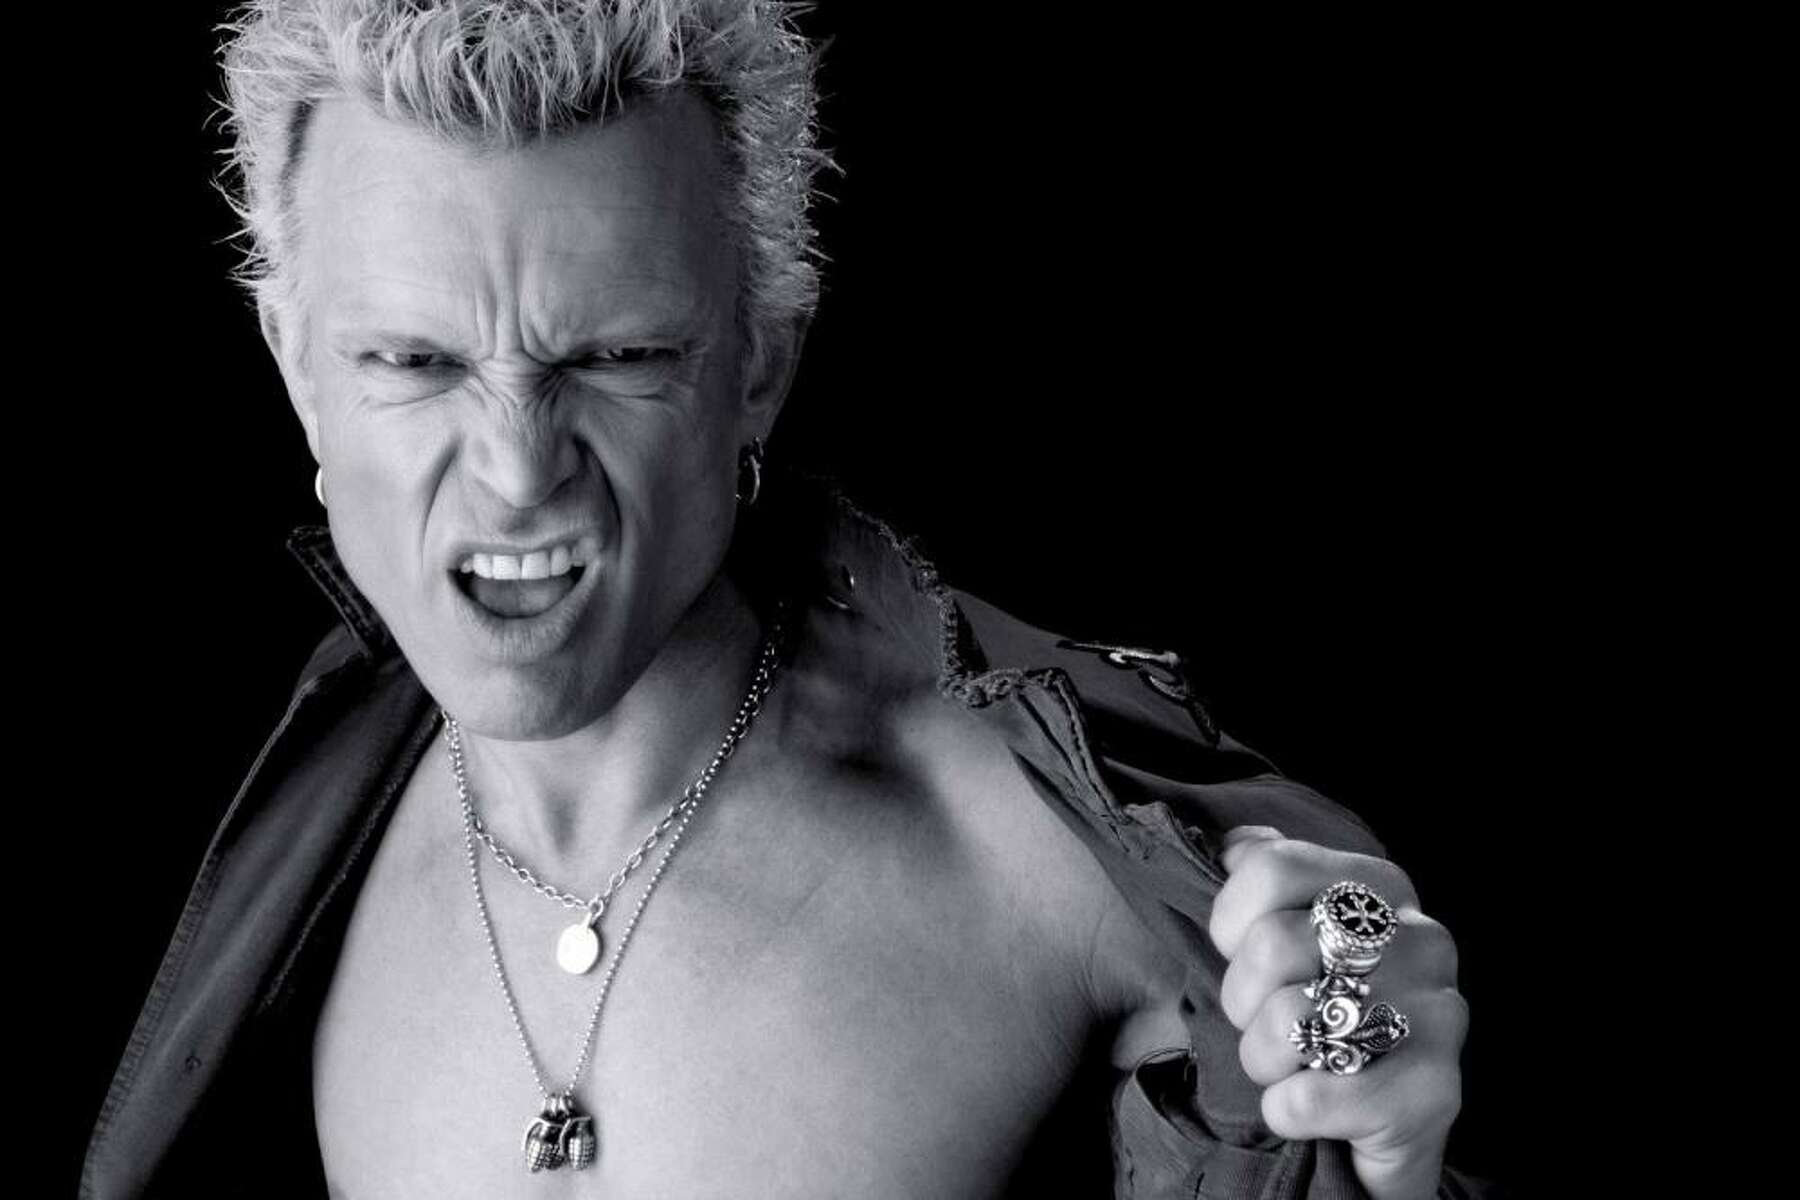 Concert Connection: Billy Idol headlines at the Big E Sept. 18